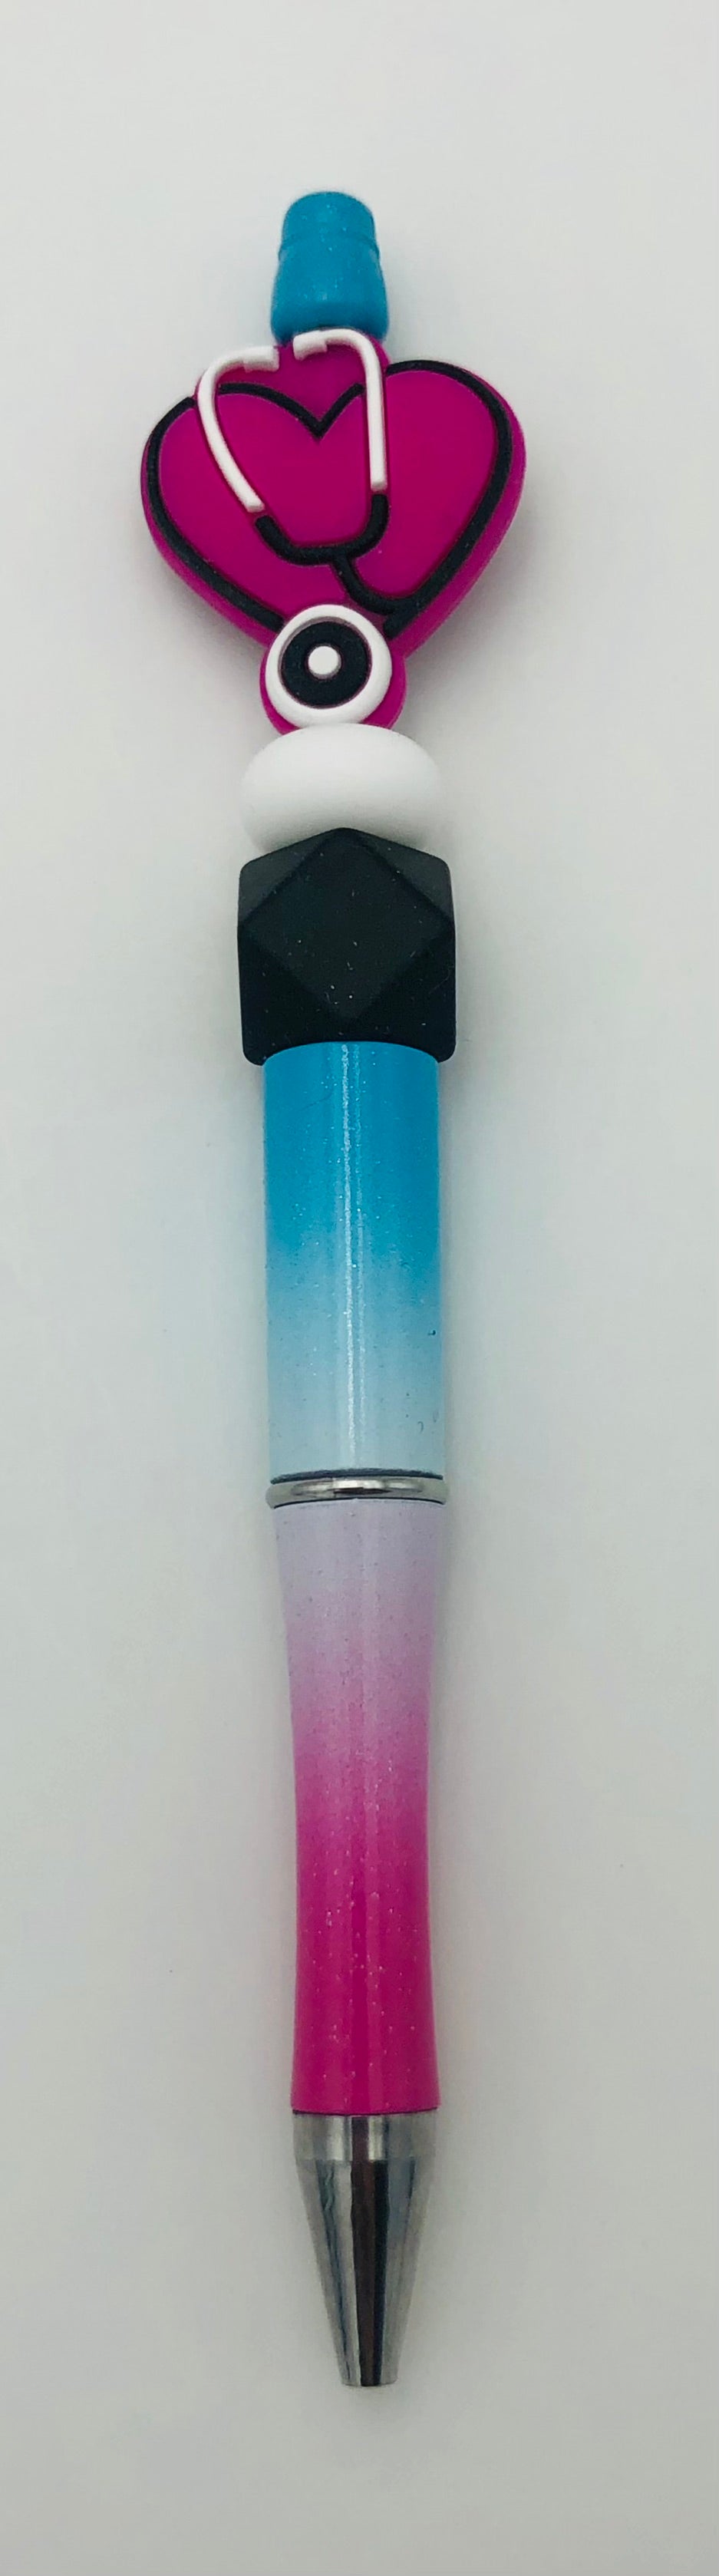 Beaded Pen - Heart with Stethoscope